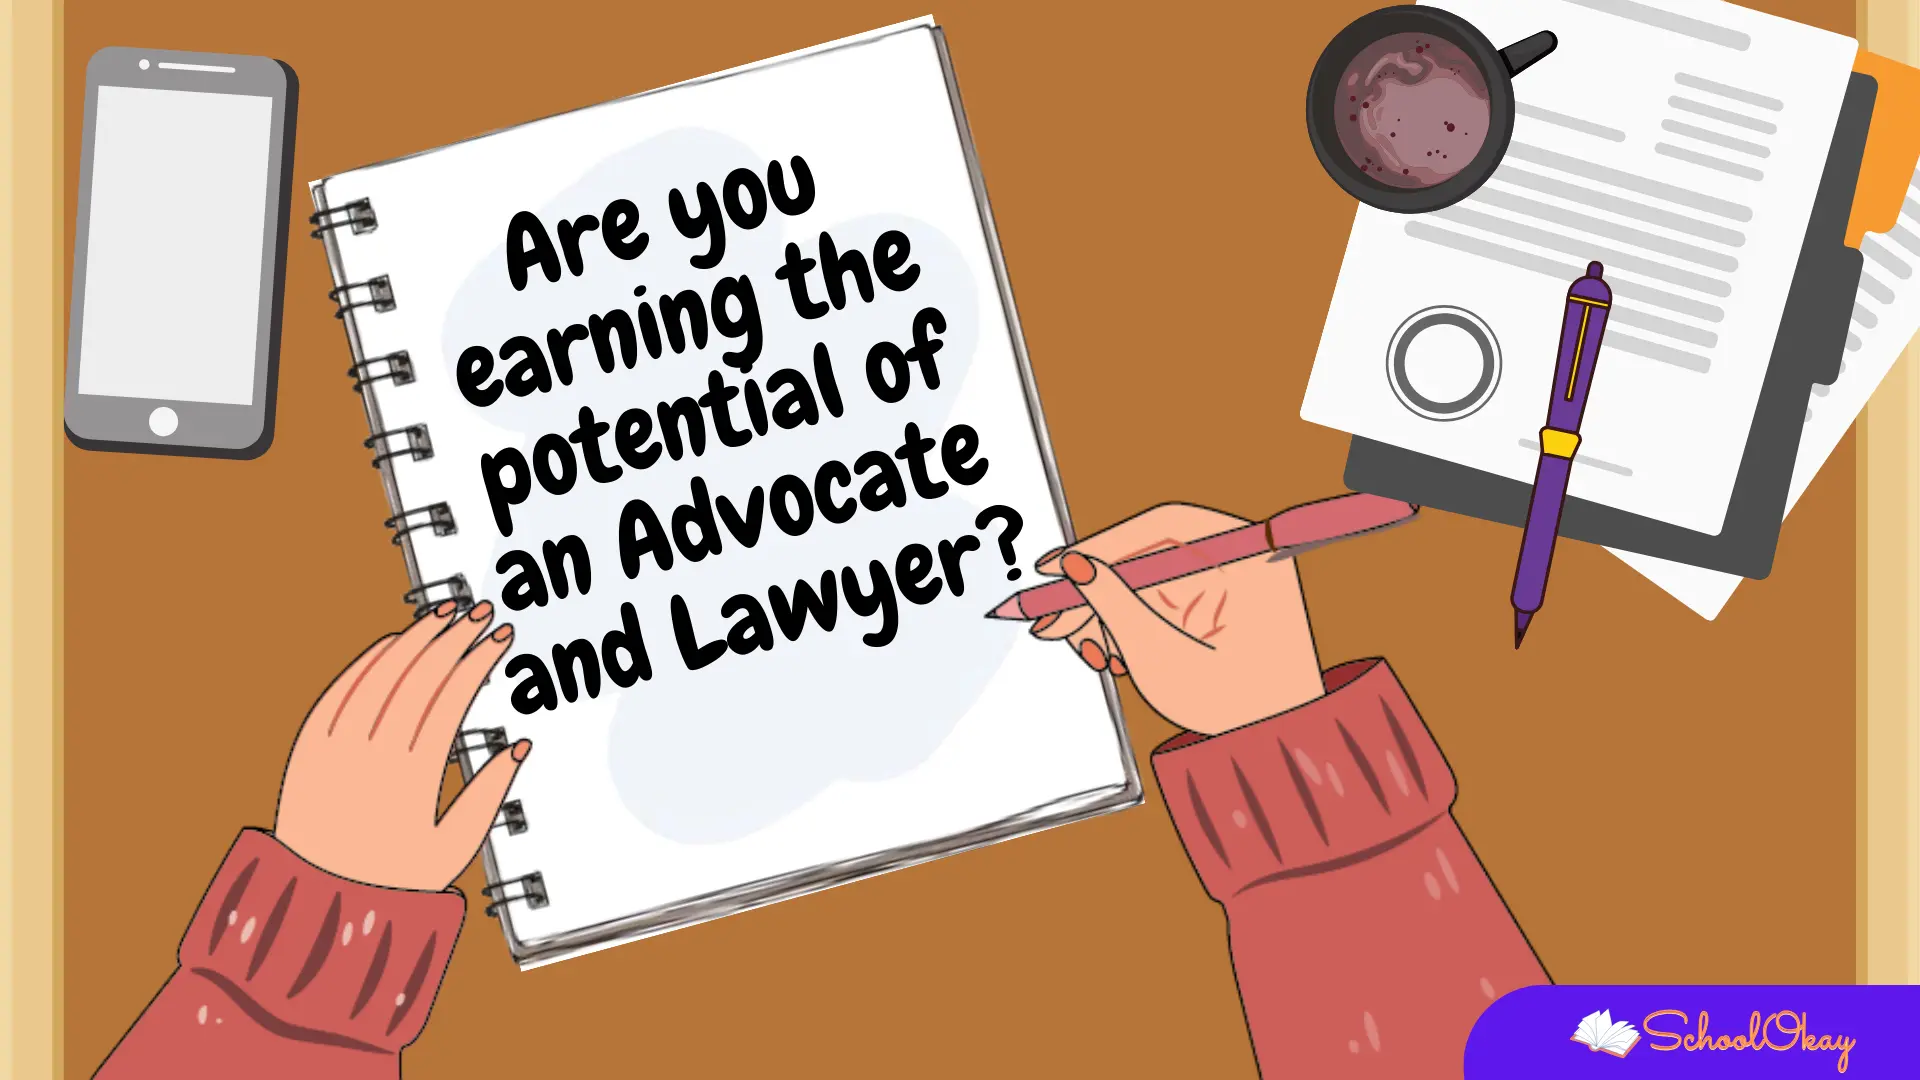 Advocate and lawyer